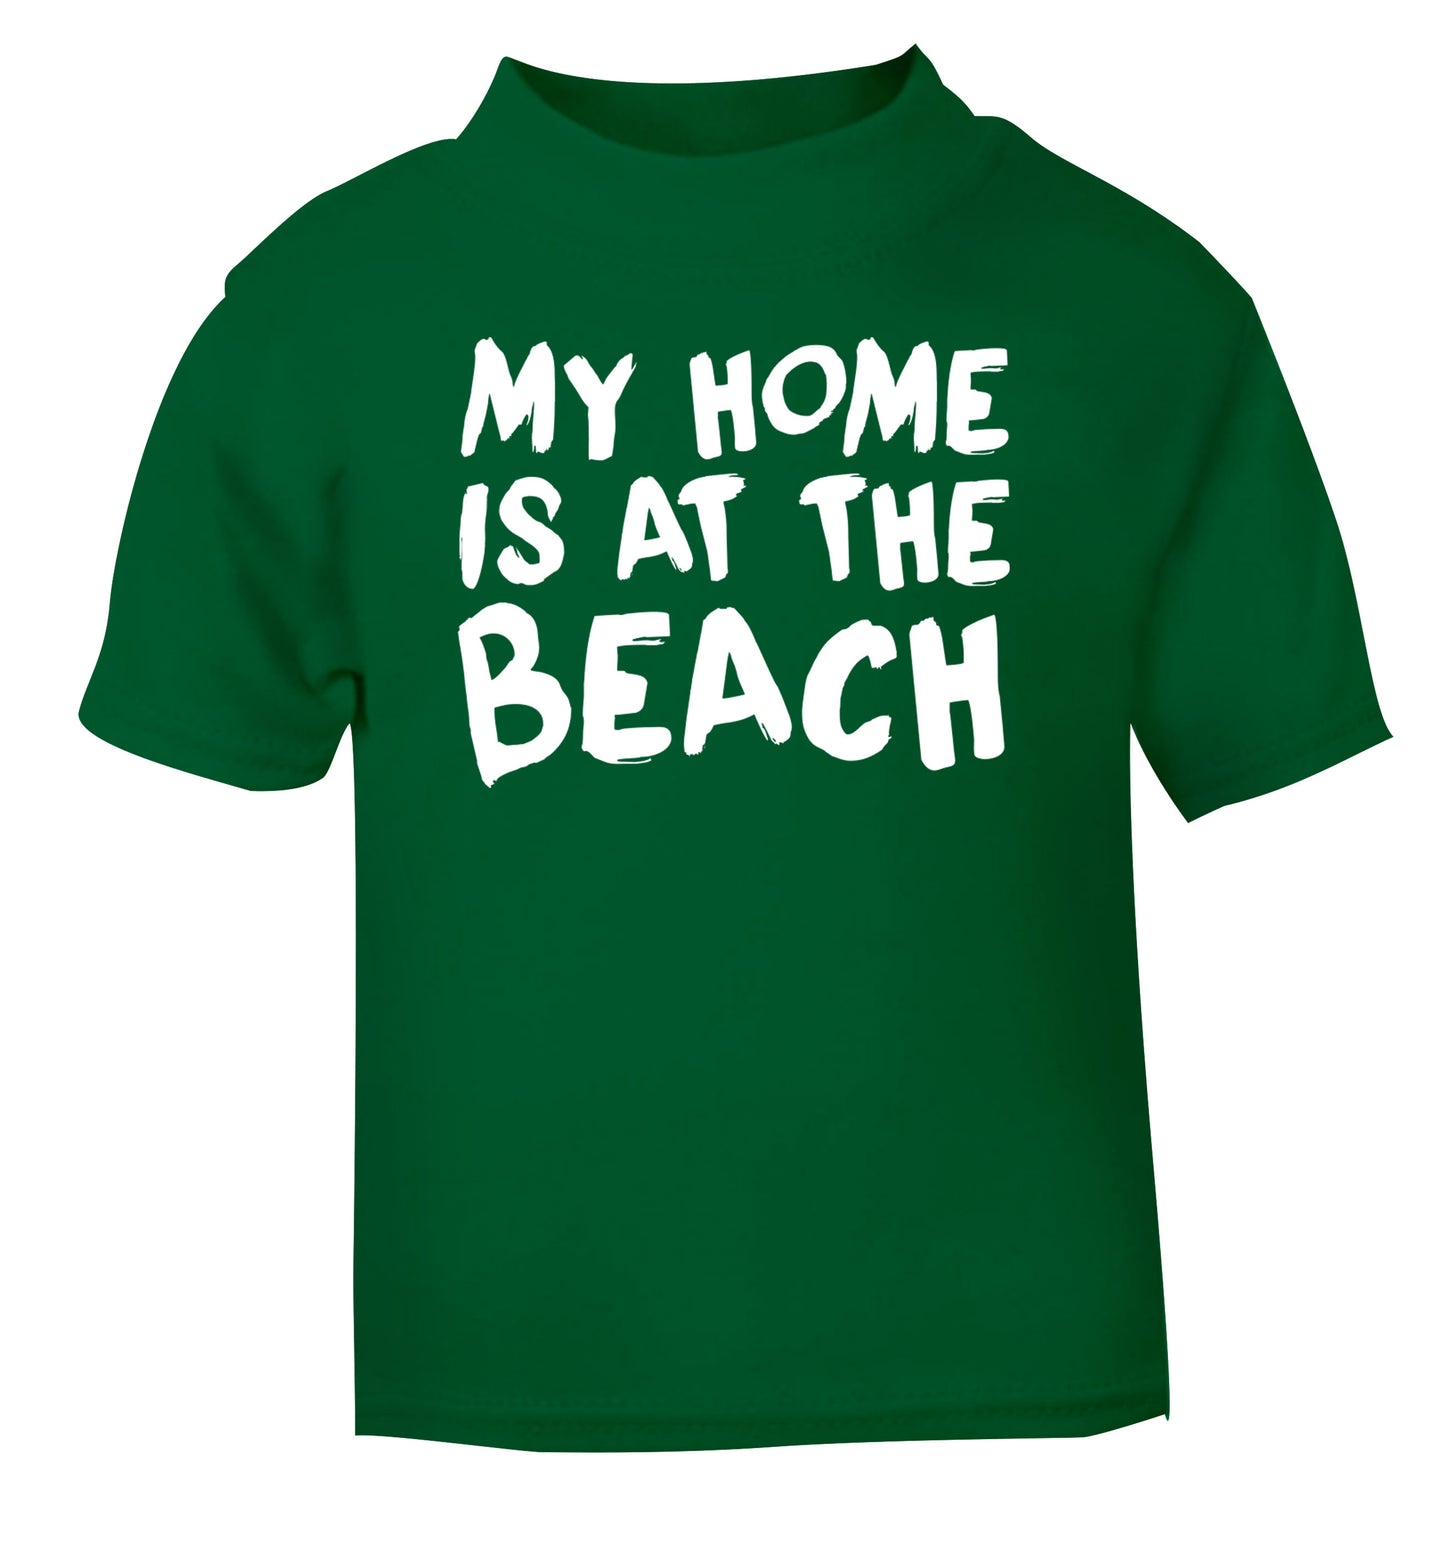 My home is at the beach green Baby Toddler Tshirt 2 Years